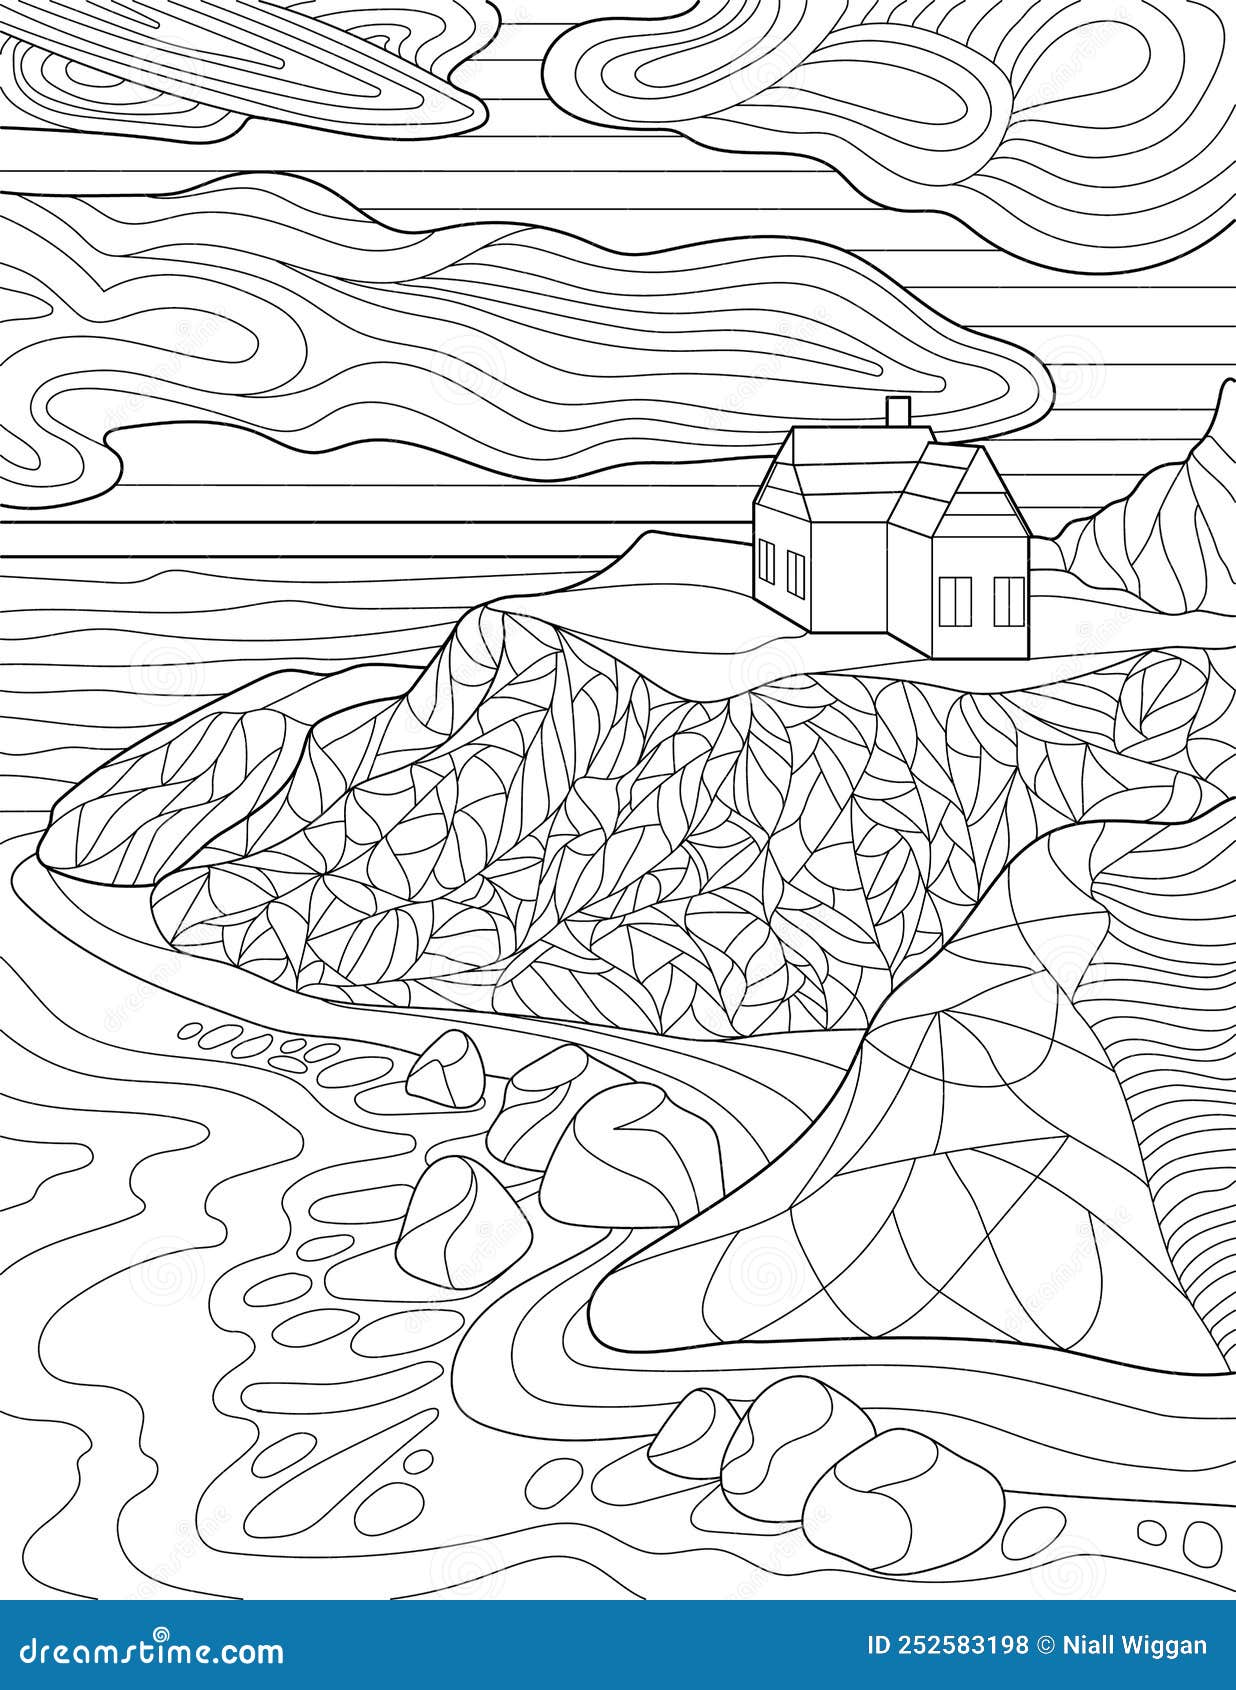 Coloring page with detailed house on hill clouds rocks and ocean sheet to be colored with home on top of cliff and stock illustration